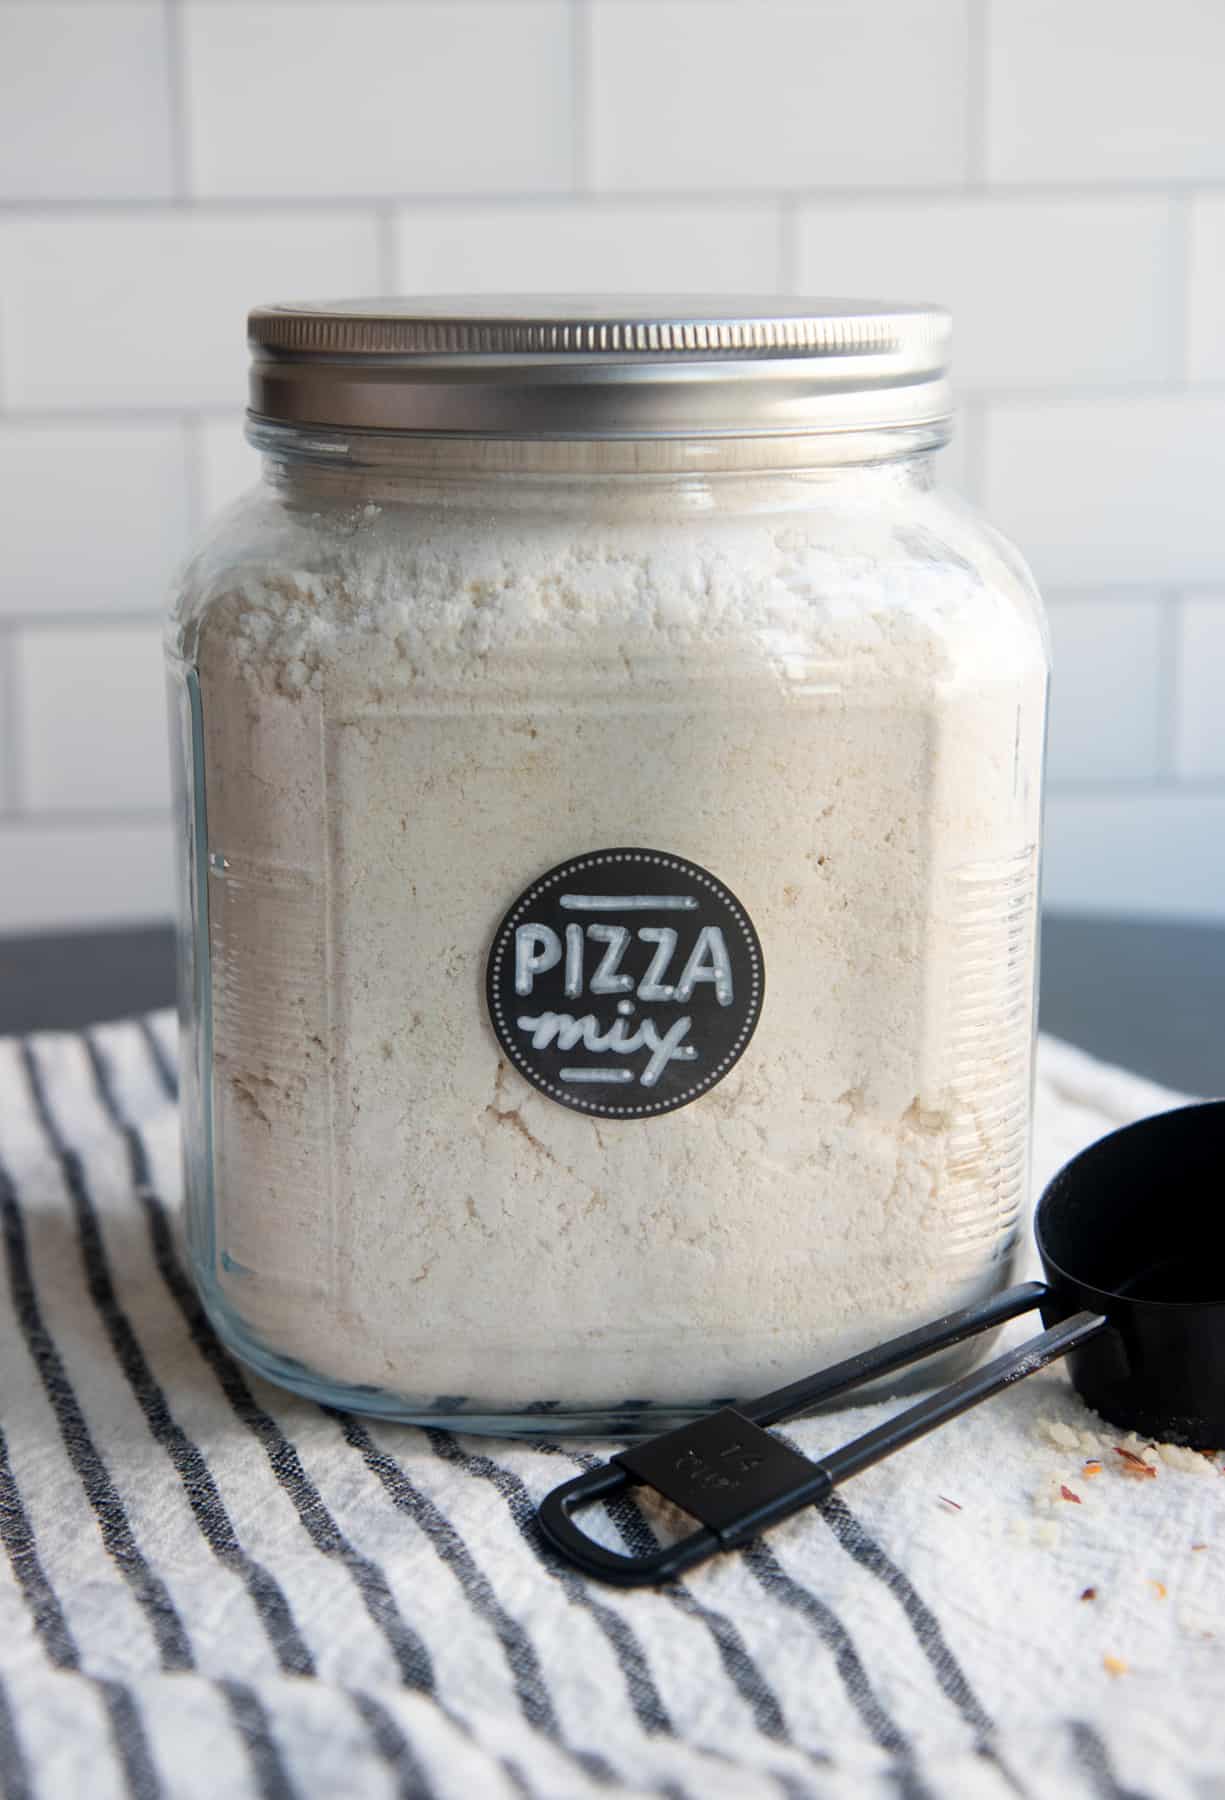 A large open jar of almond flour pizza crust mix sits next to a measuring cup.